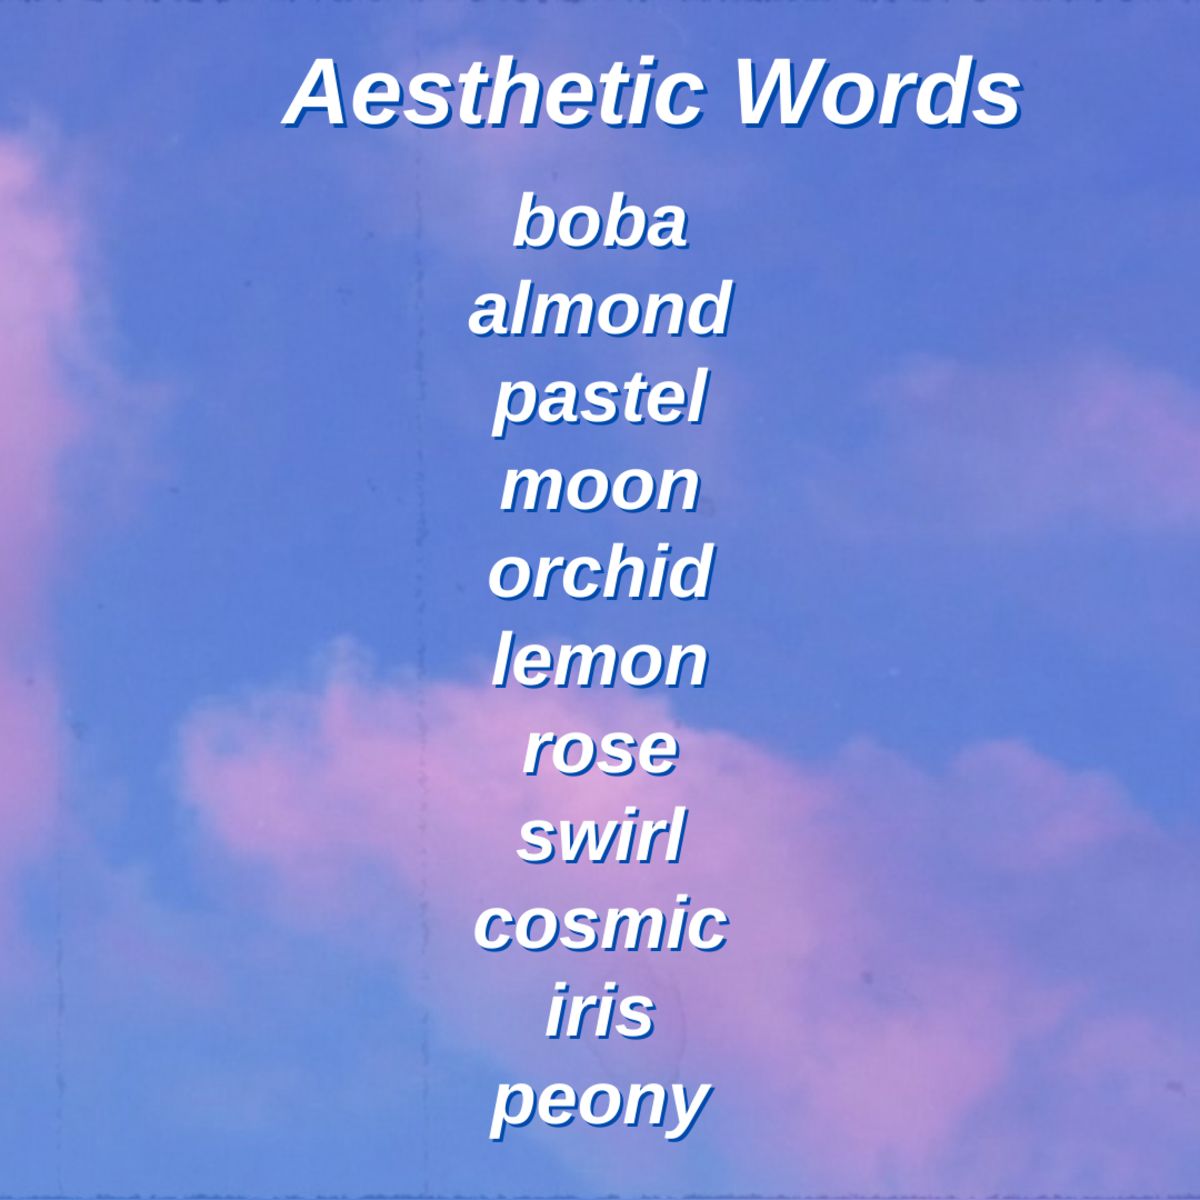 Here are some more aesthetic words for your brainstorming session!